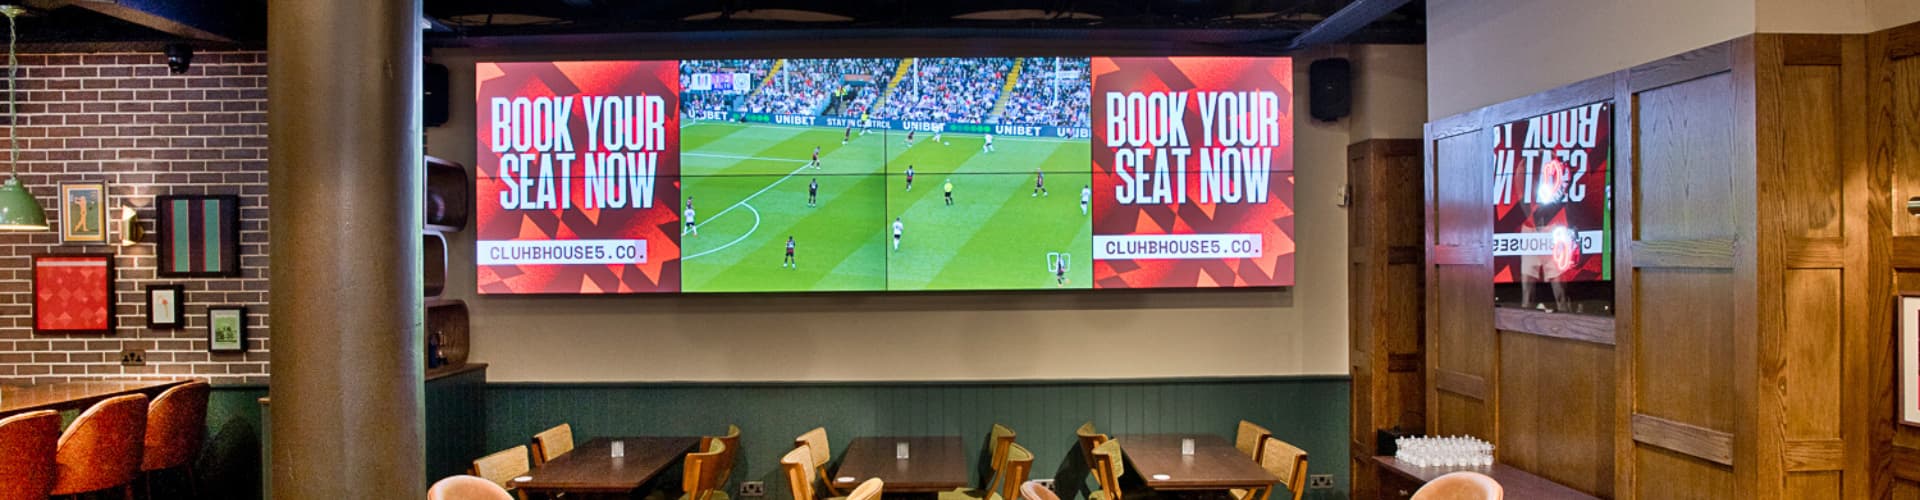 Clubhouse 5 Big Screen - Book Now